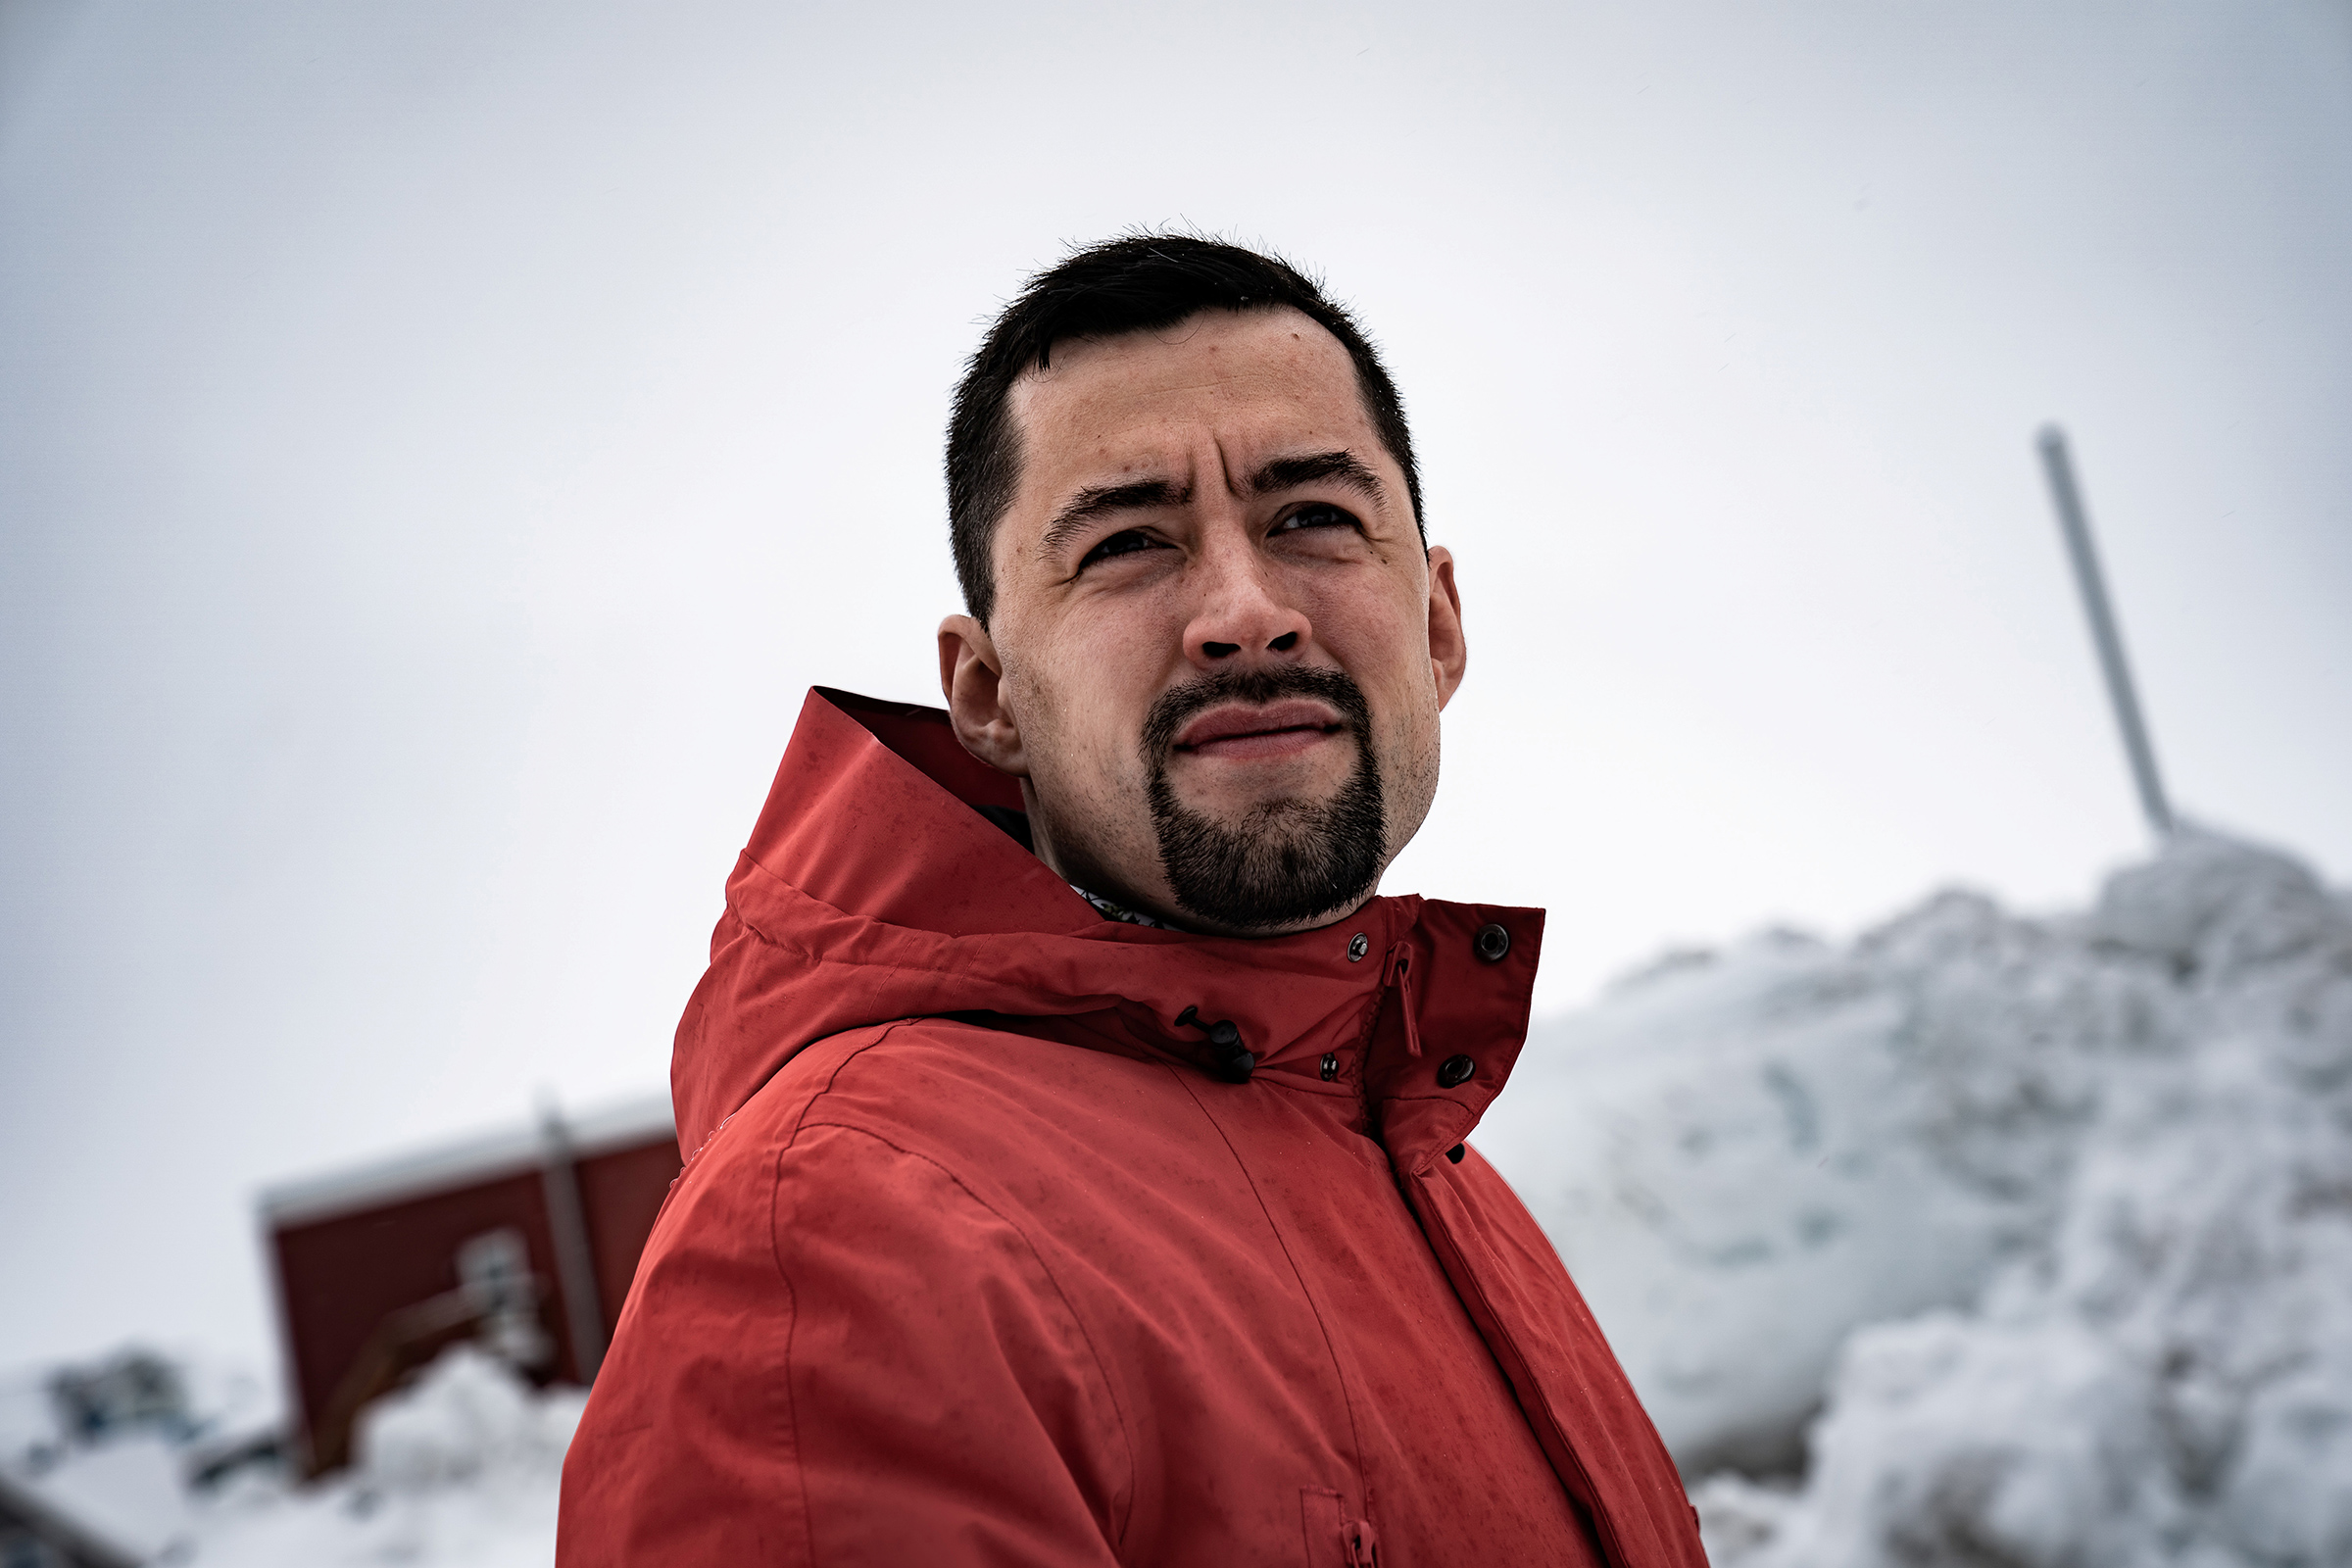 Mute Egede, pictured ahead of the parliamentary elections in April, in which his Inuit Ataqatigiit party secured a win and lifted him to Prime Minister. (Emil Helms—Ritzau Scanpix/Reuters)